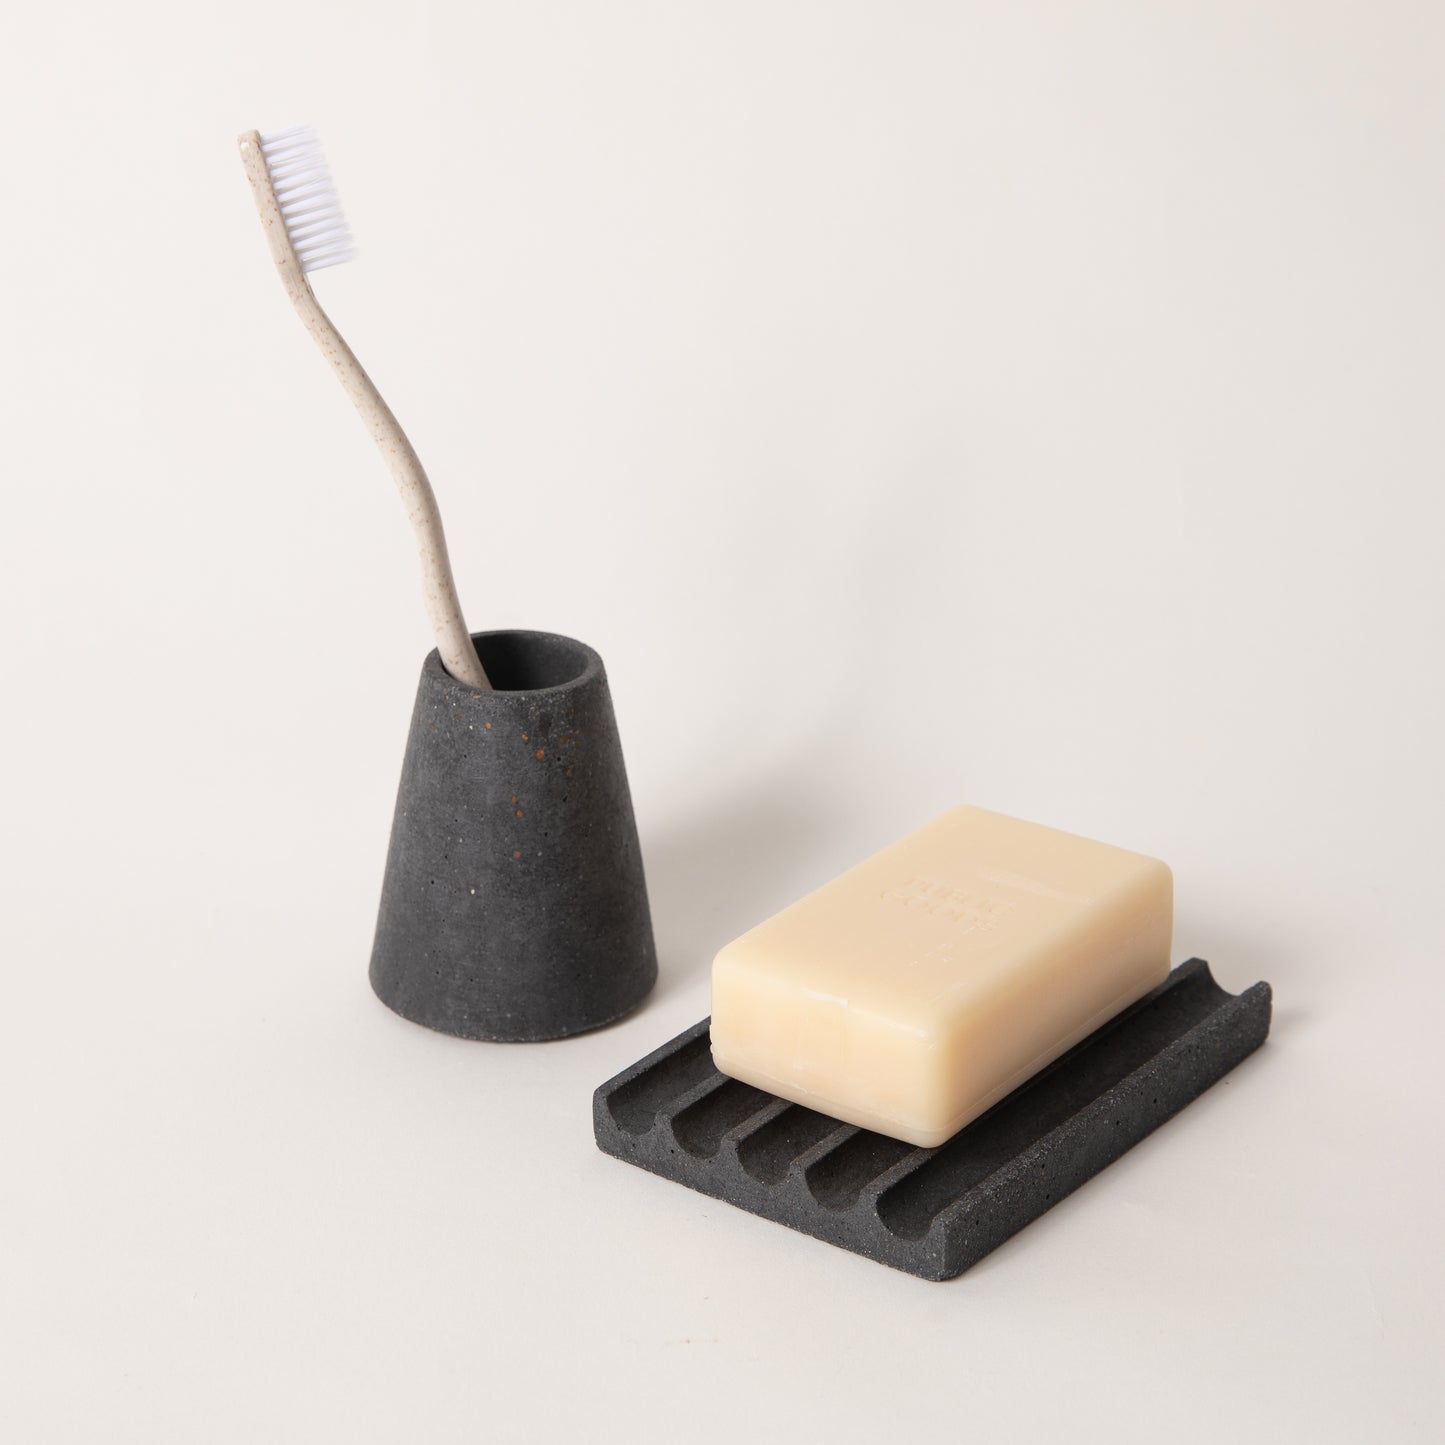 Black terrazzo toothbrush holder & soap dish set, styled with a toothbrush & bar of soap.